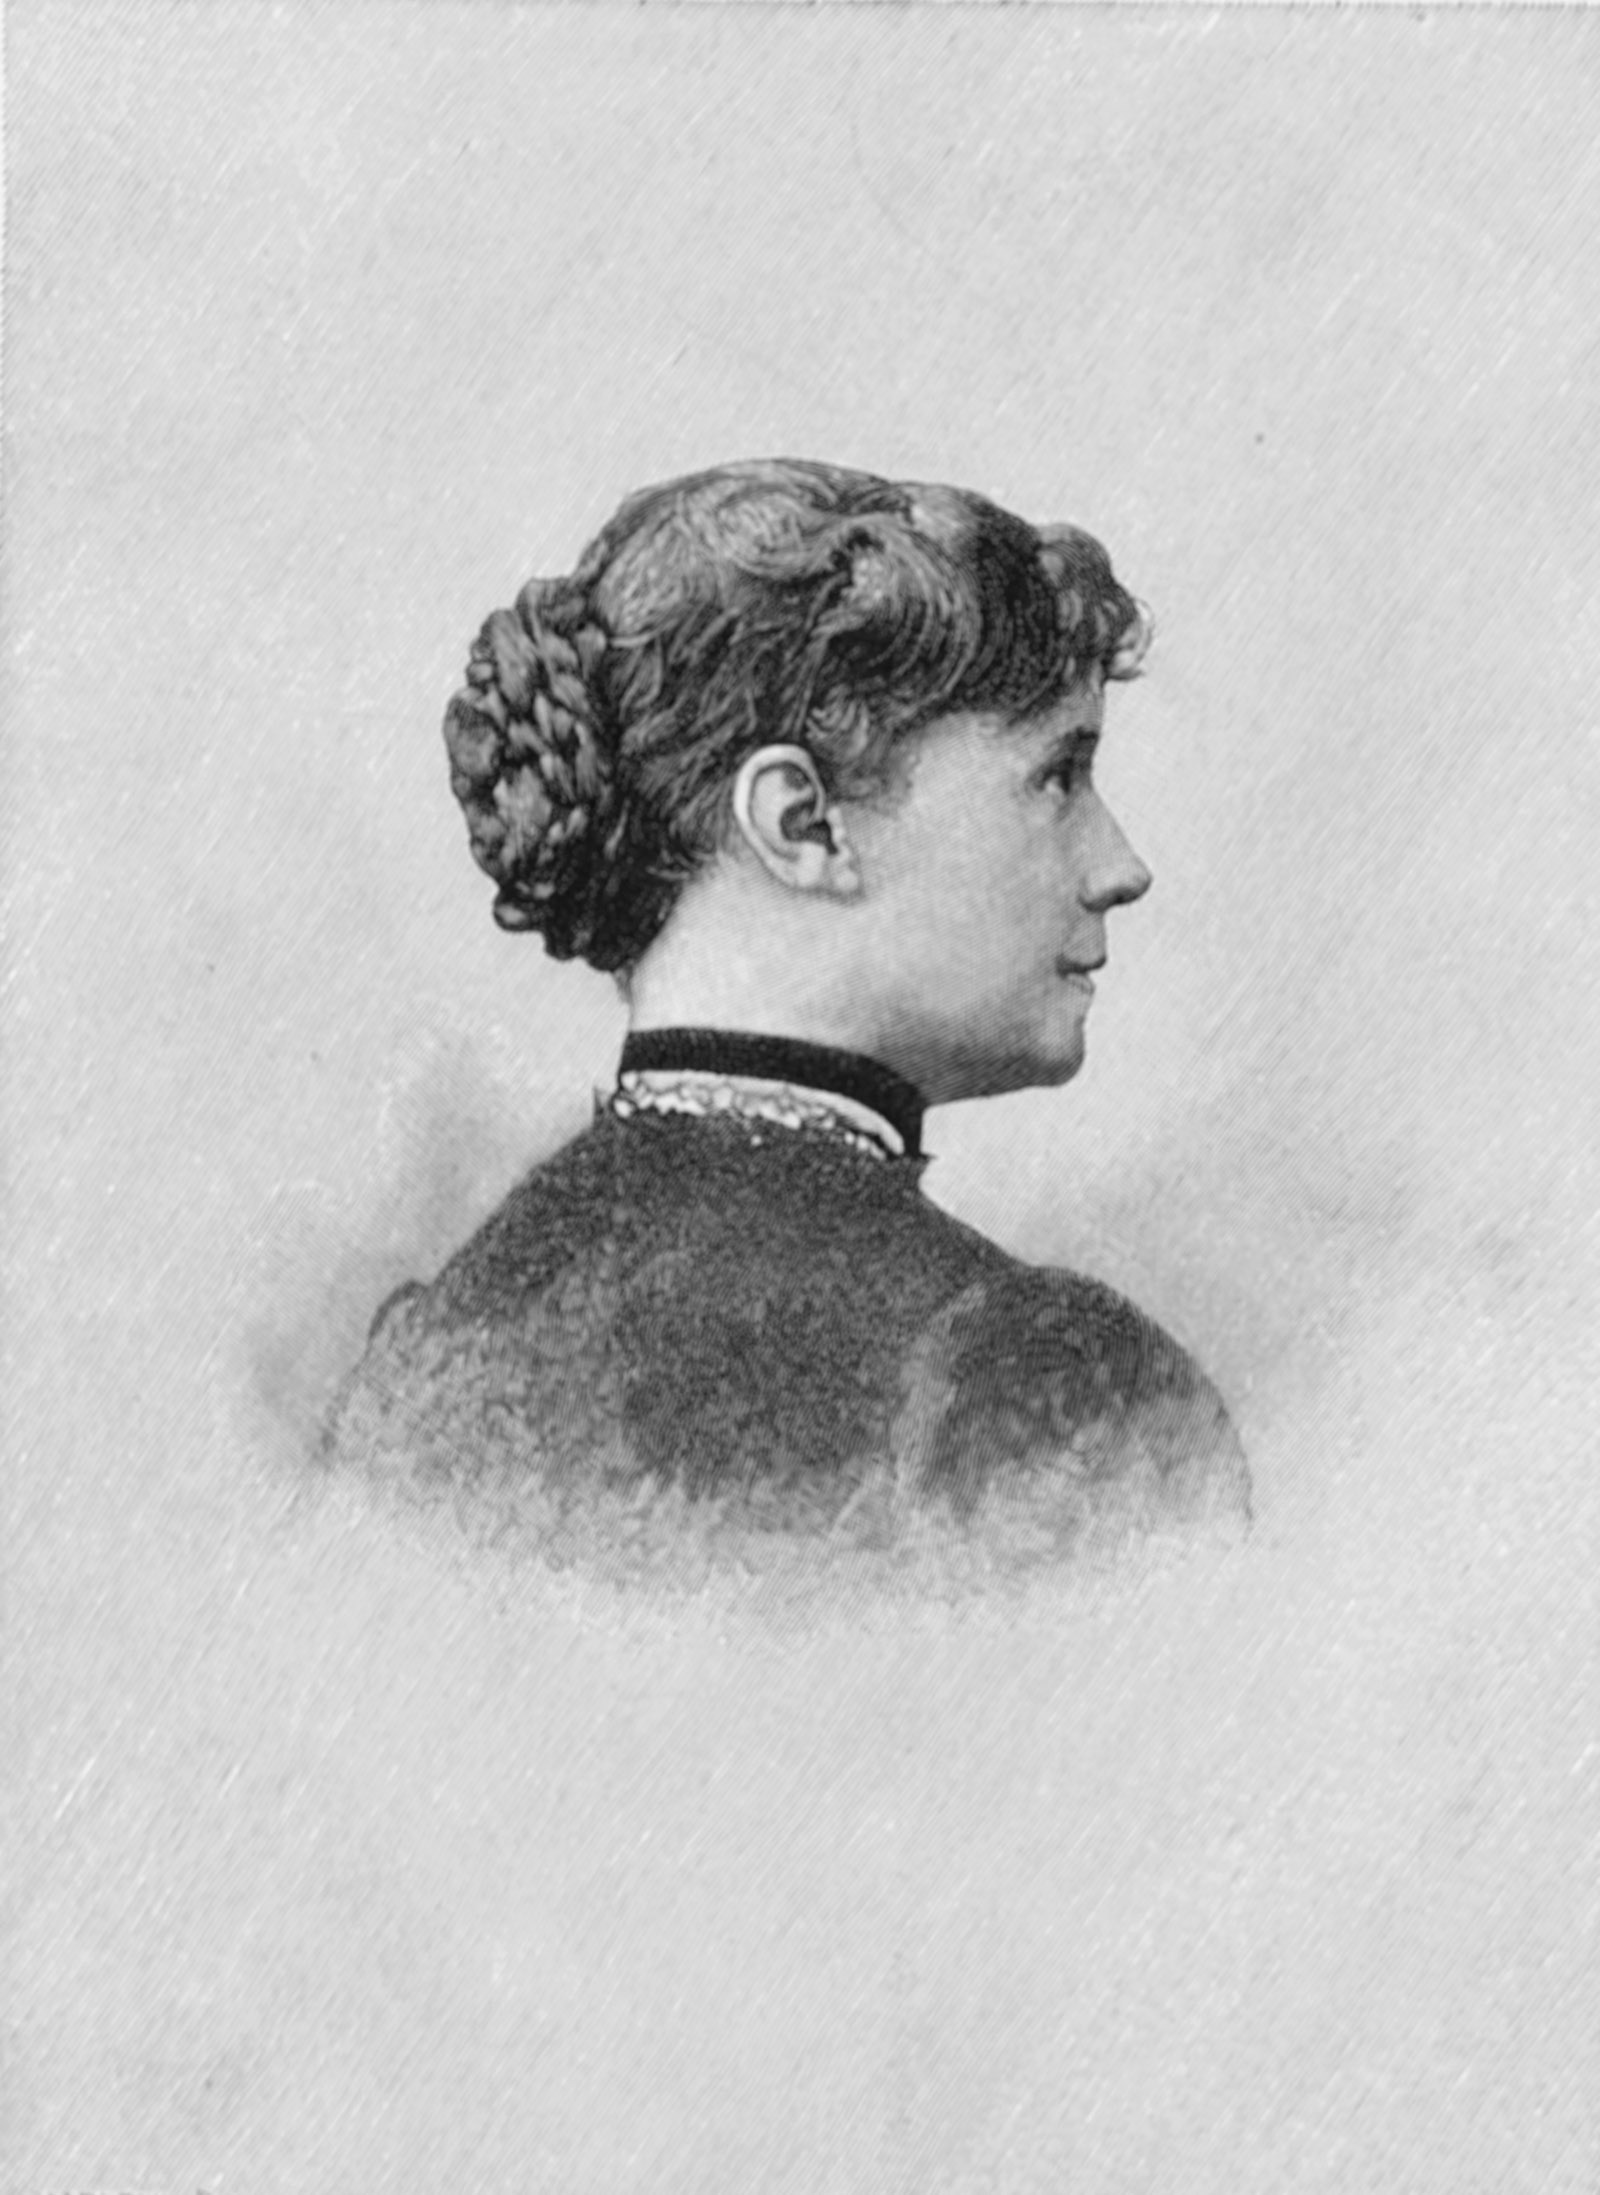 Constance Fenimore Woolson